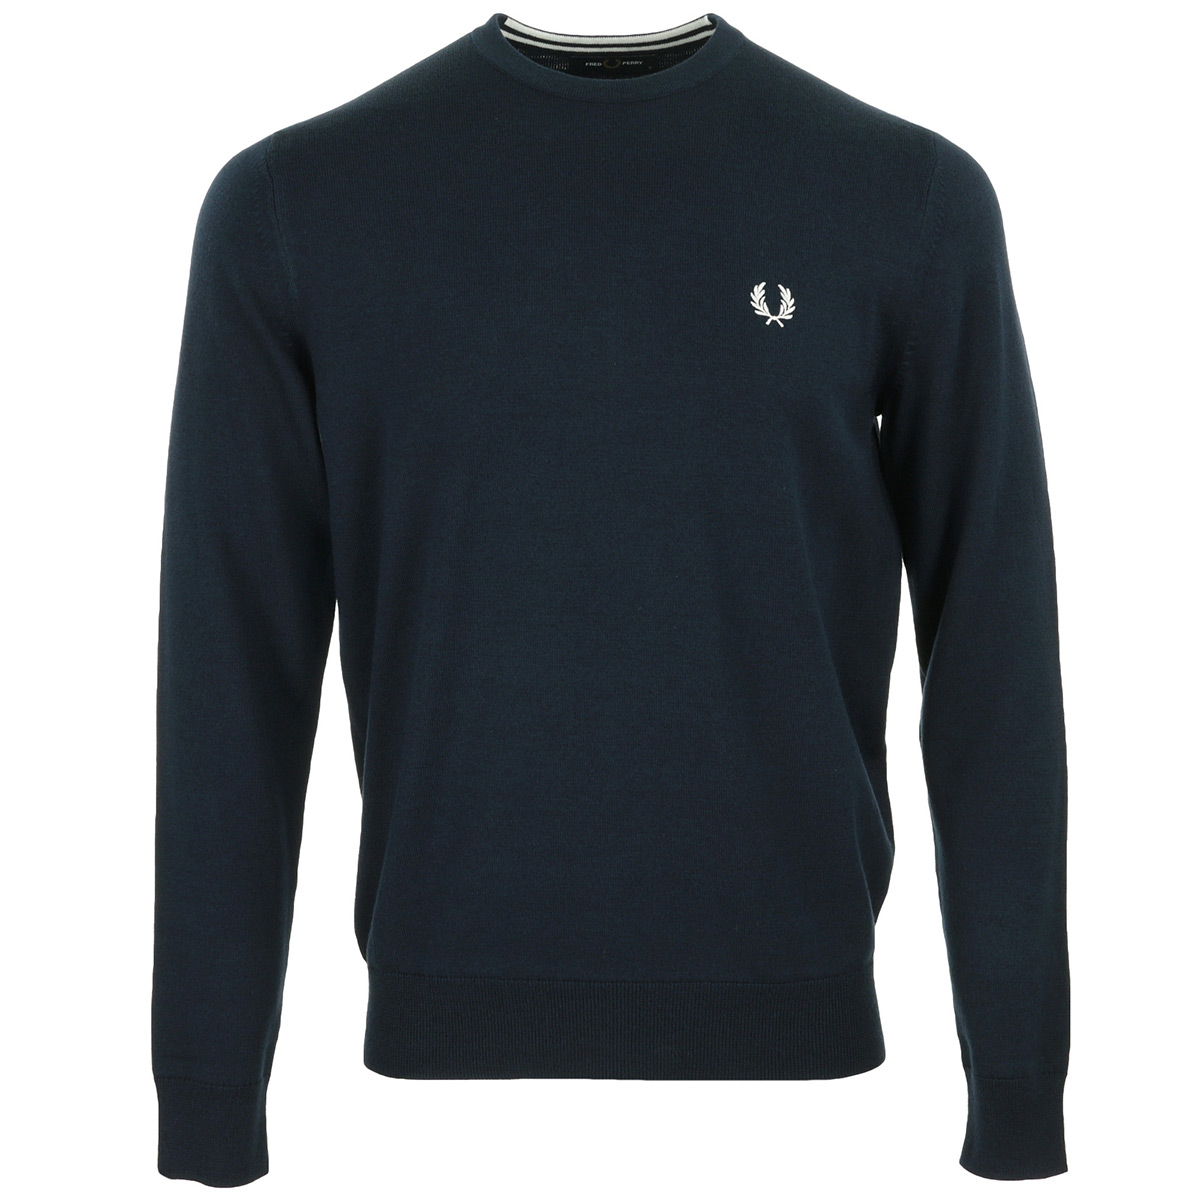 Fred Perry "Classic Crew Neck Jumper"